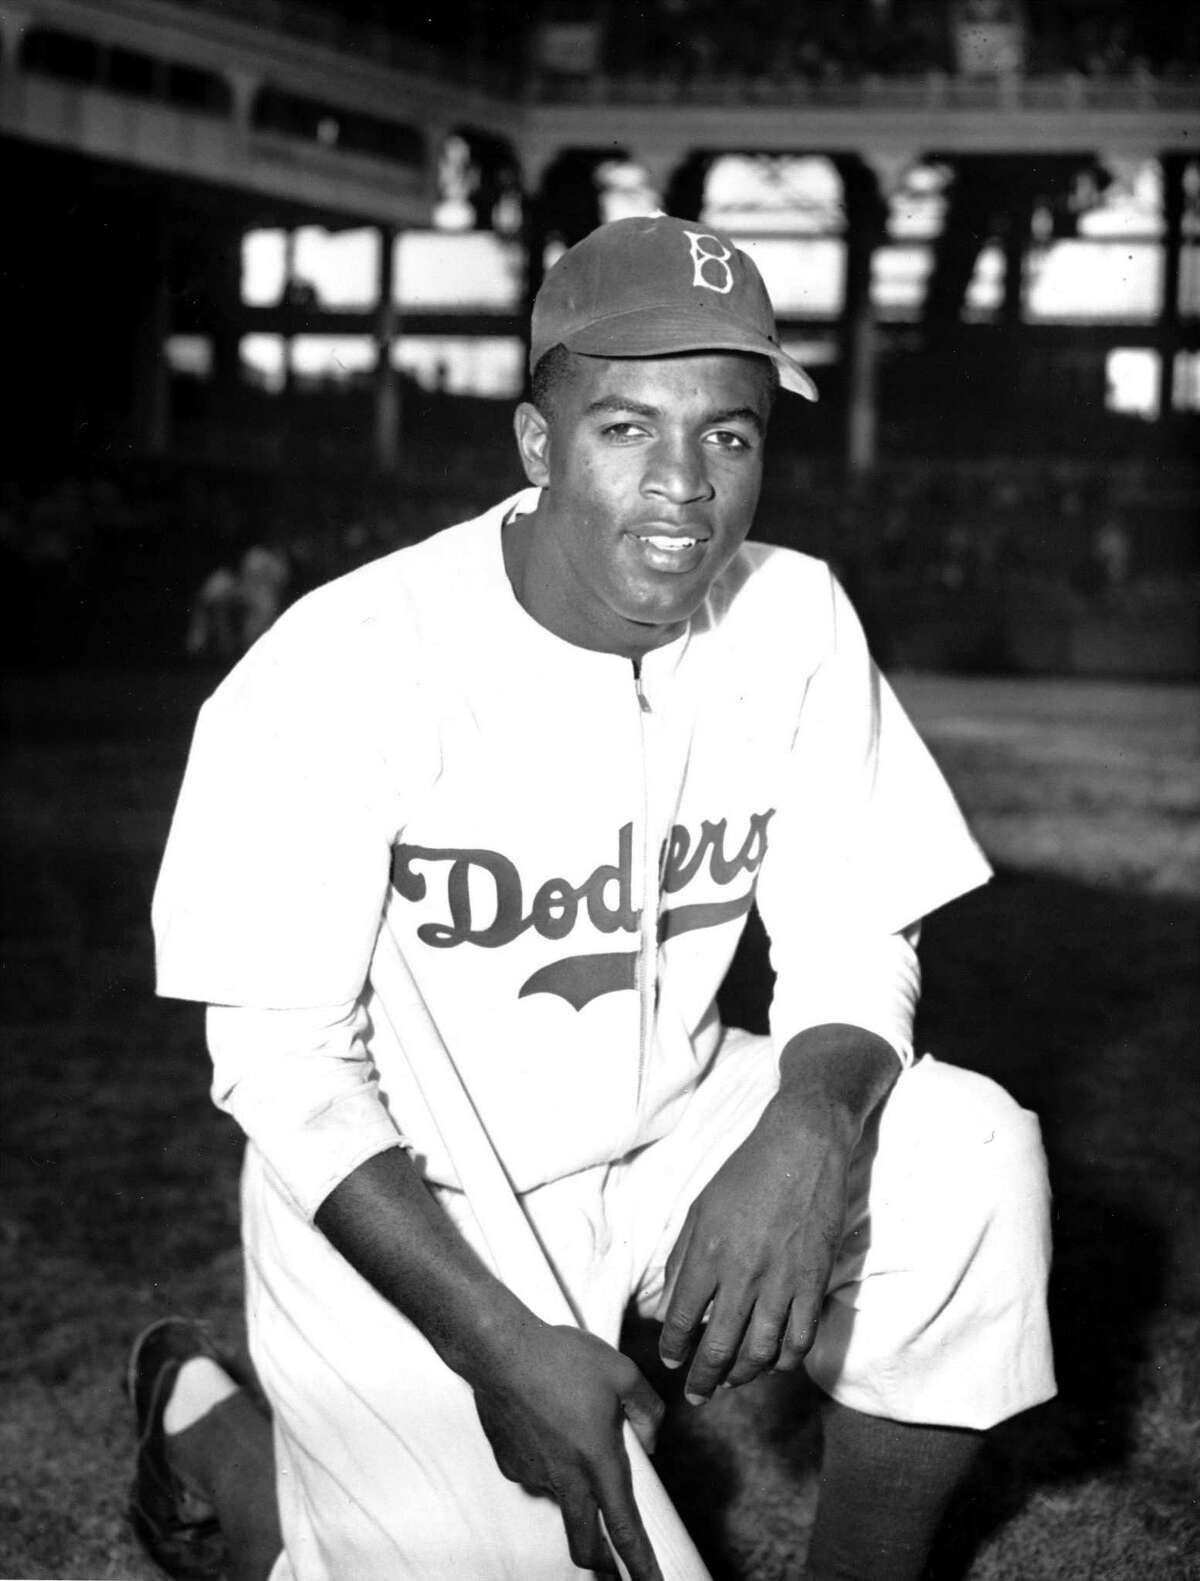 Jackie Robinson at Ebbets Field in 1947. He broke Major League Baseball’s color barrier 75 years ago, and changed our nation for the better.